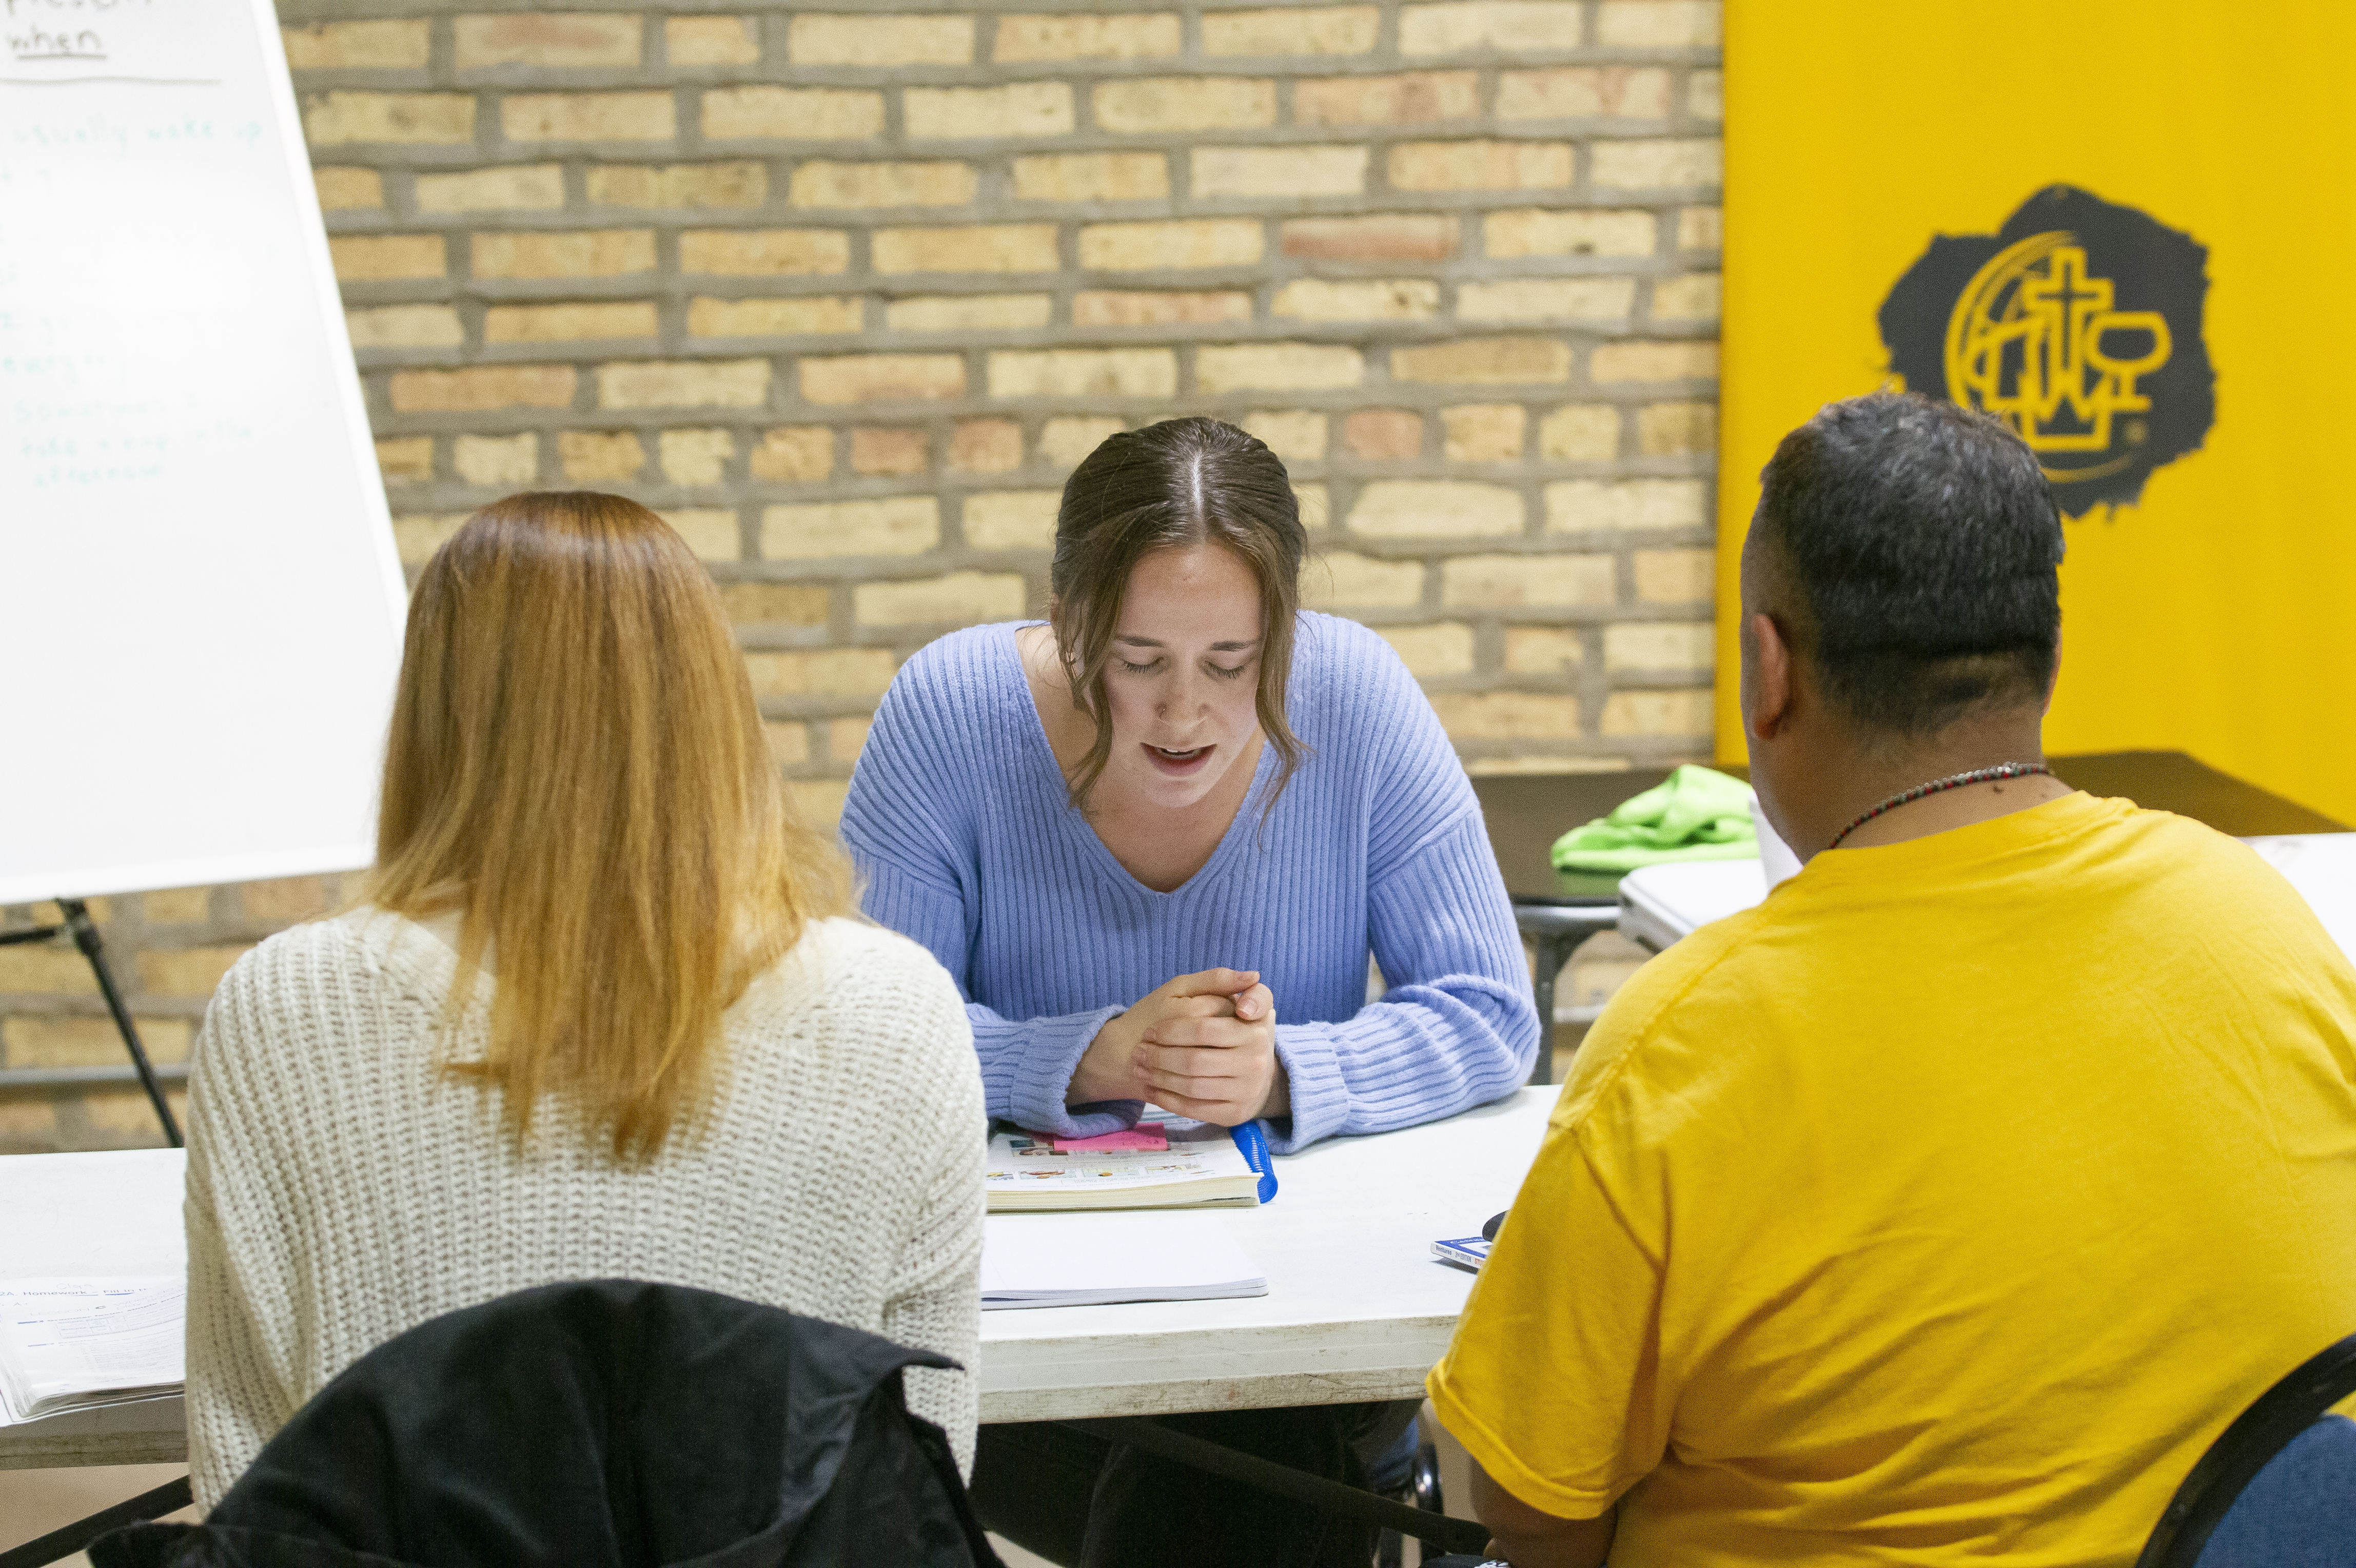 Grace, a Moody student, prays for the prayer requests of two of her conversational English students during an ESL class for refugees and immigrants at the Family Empowerment Center in Rogers Park.